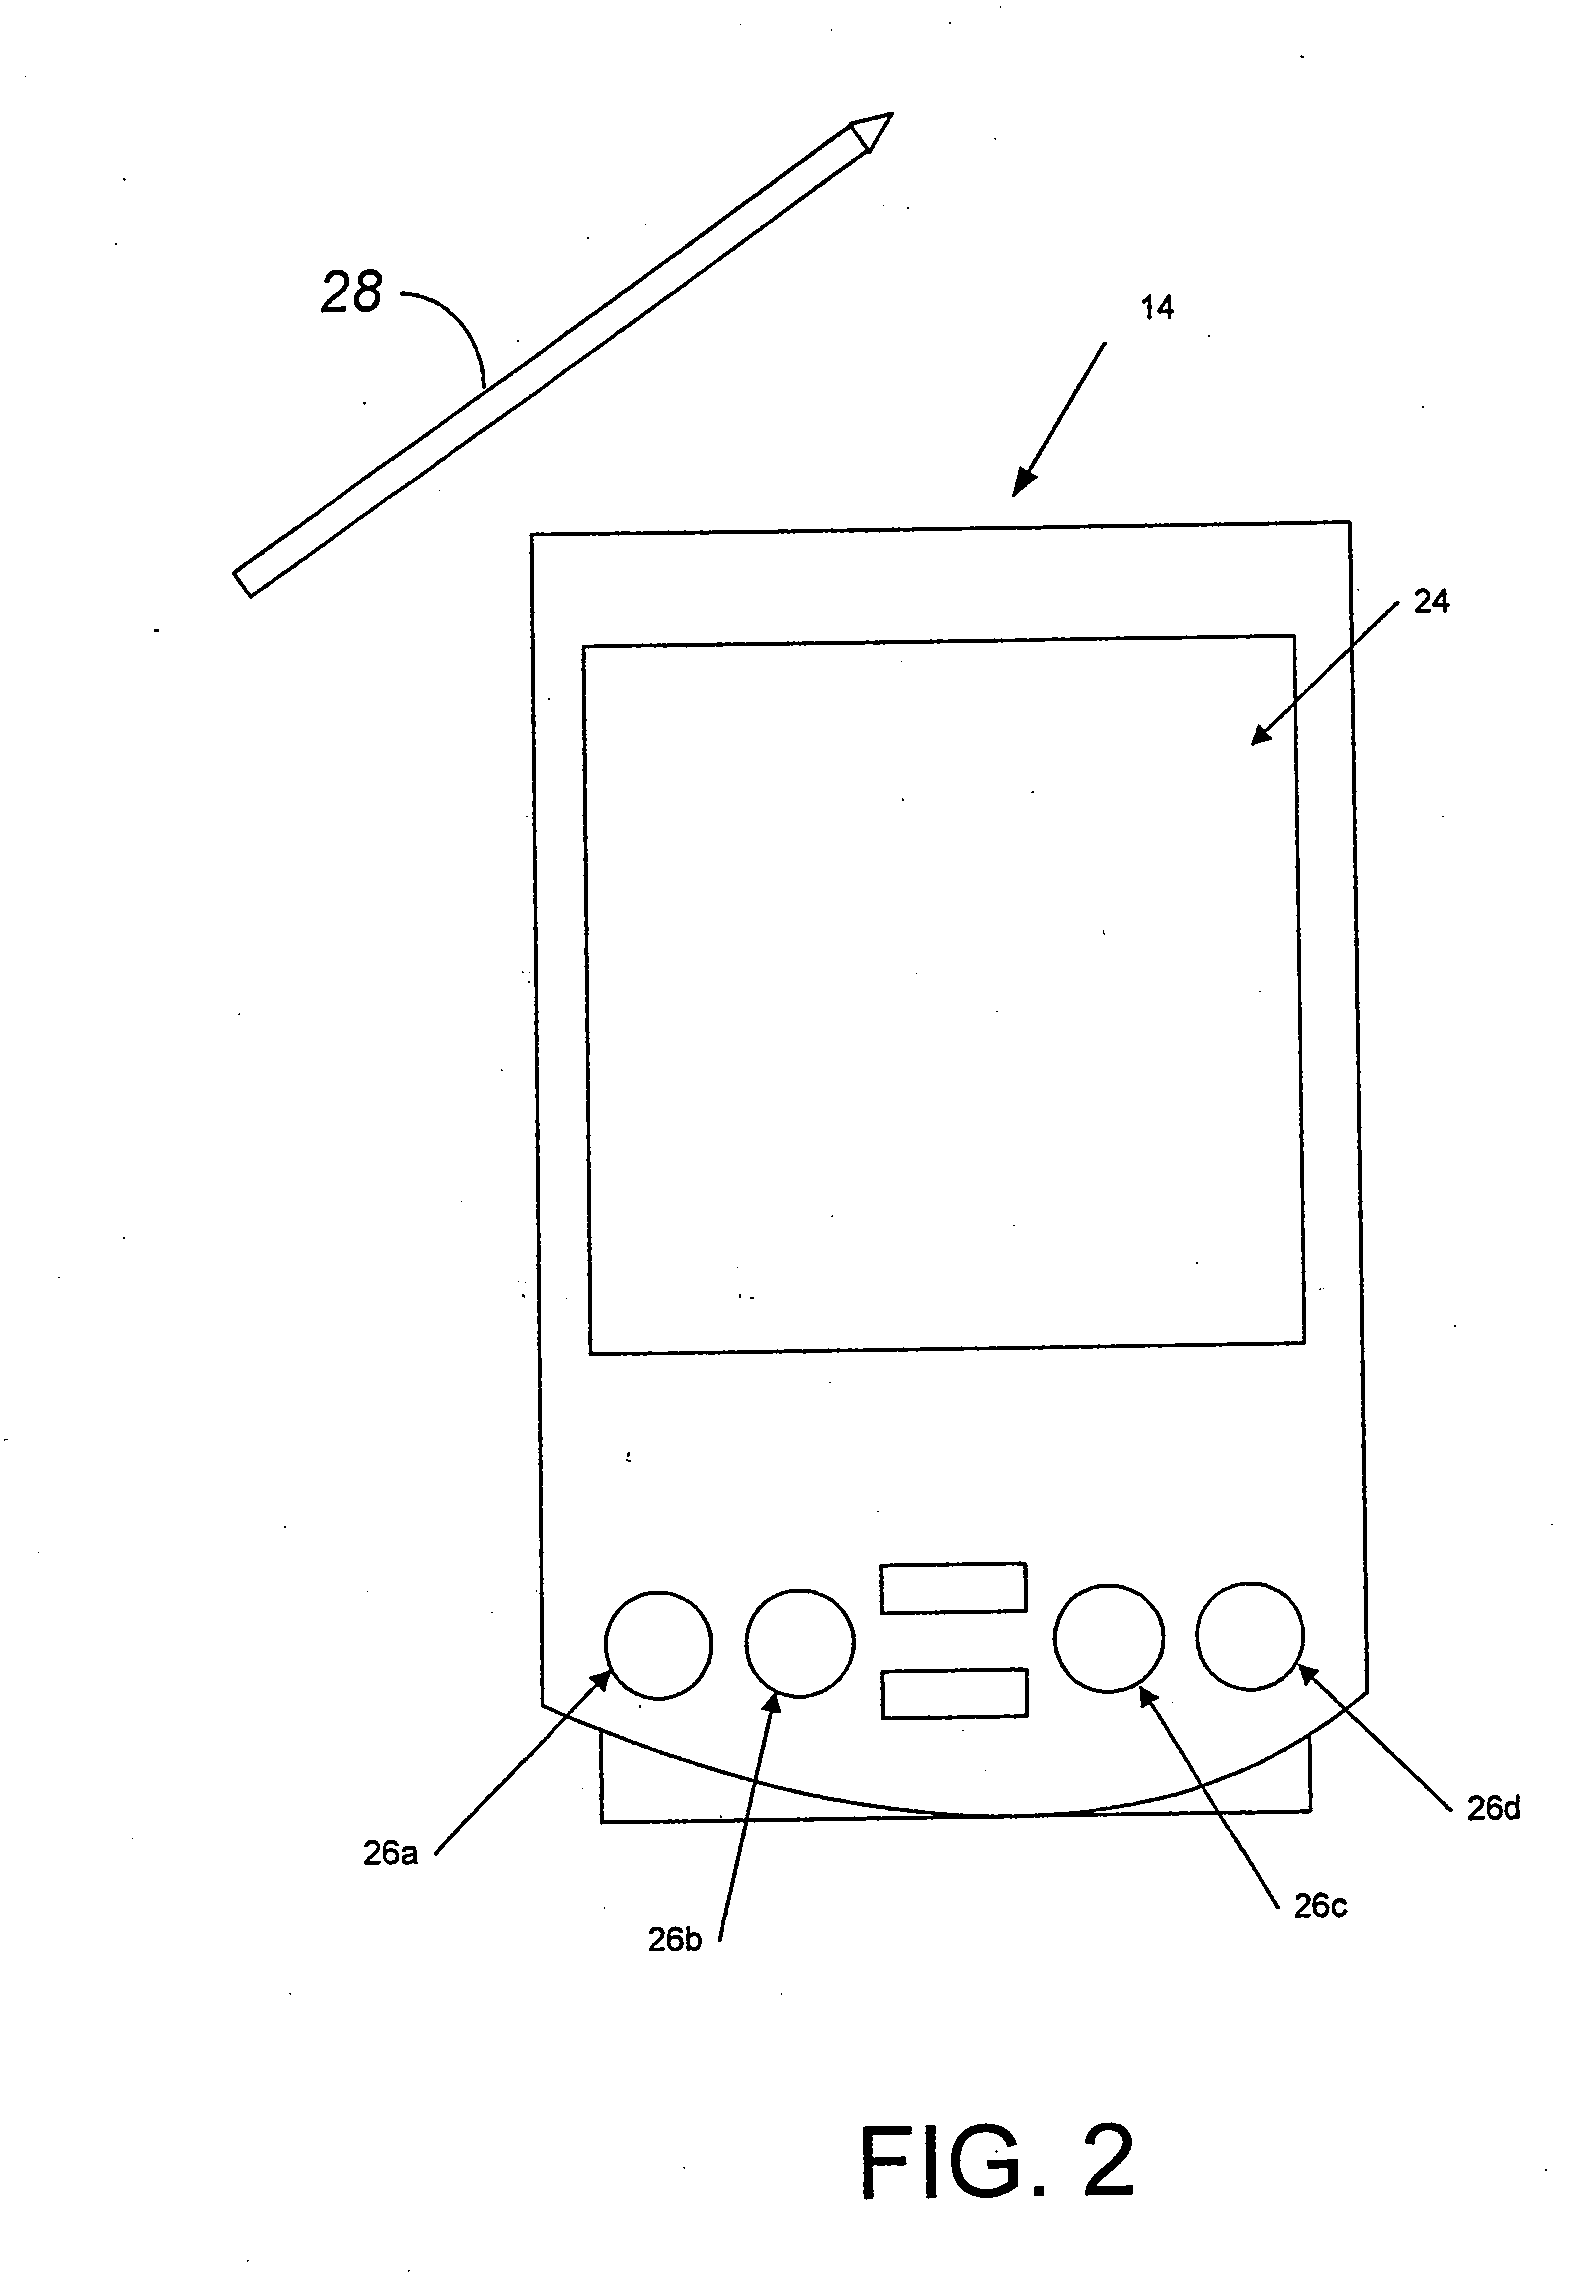 Handheld device graphical user interfaces for displaying patient medical records